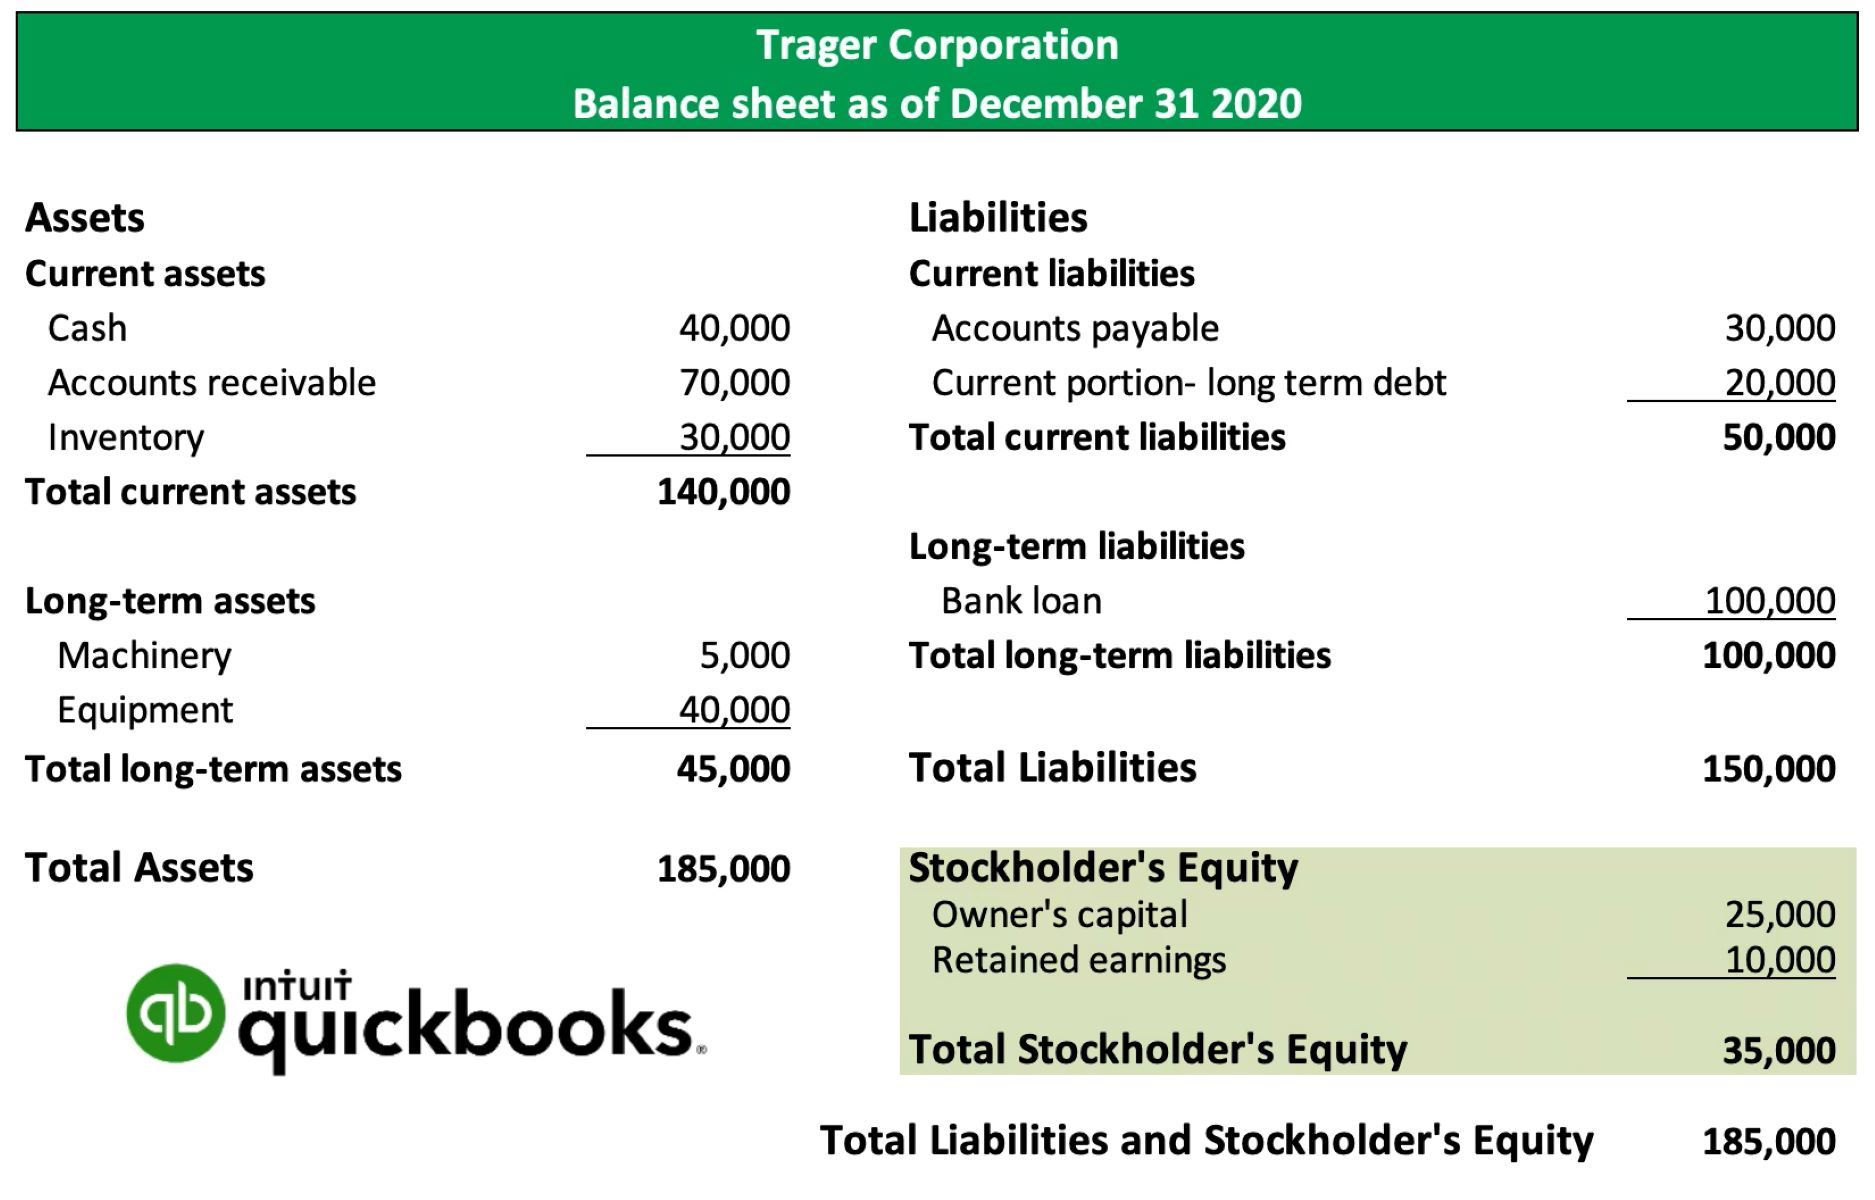 What Are Retained Earnings In Quickbooks